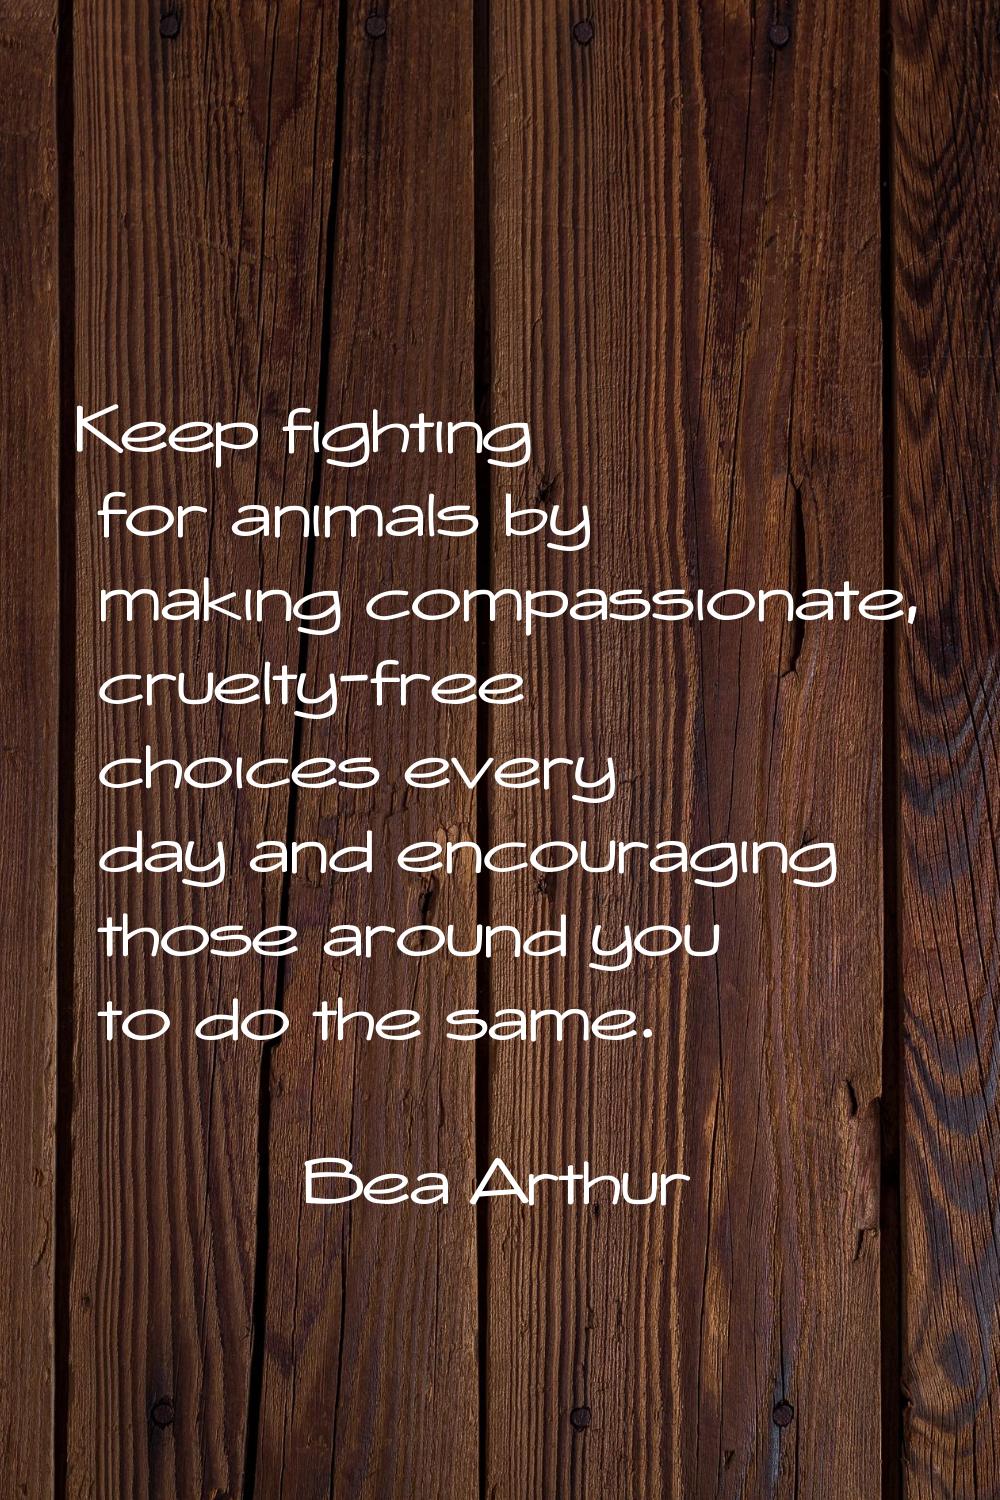 Keep fighting for animals by making compassionate, cruelty-free choices every day and encouraging t